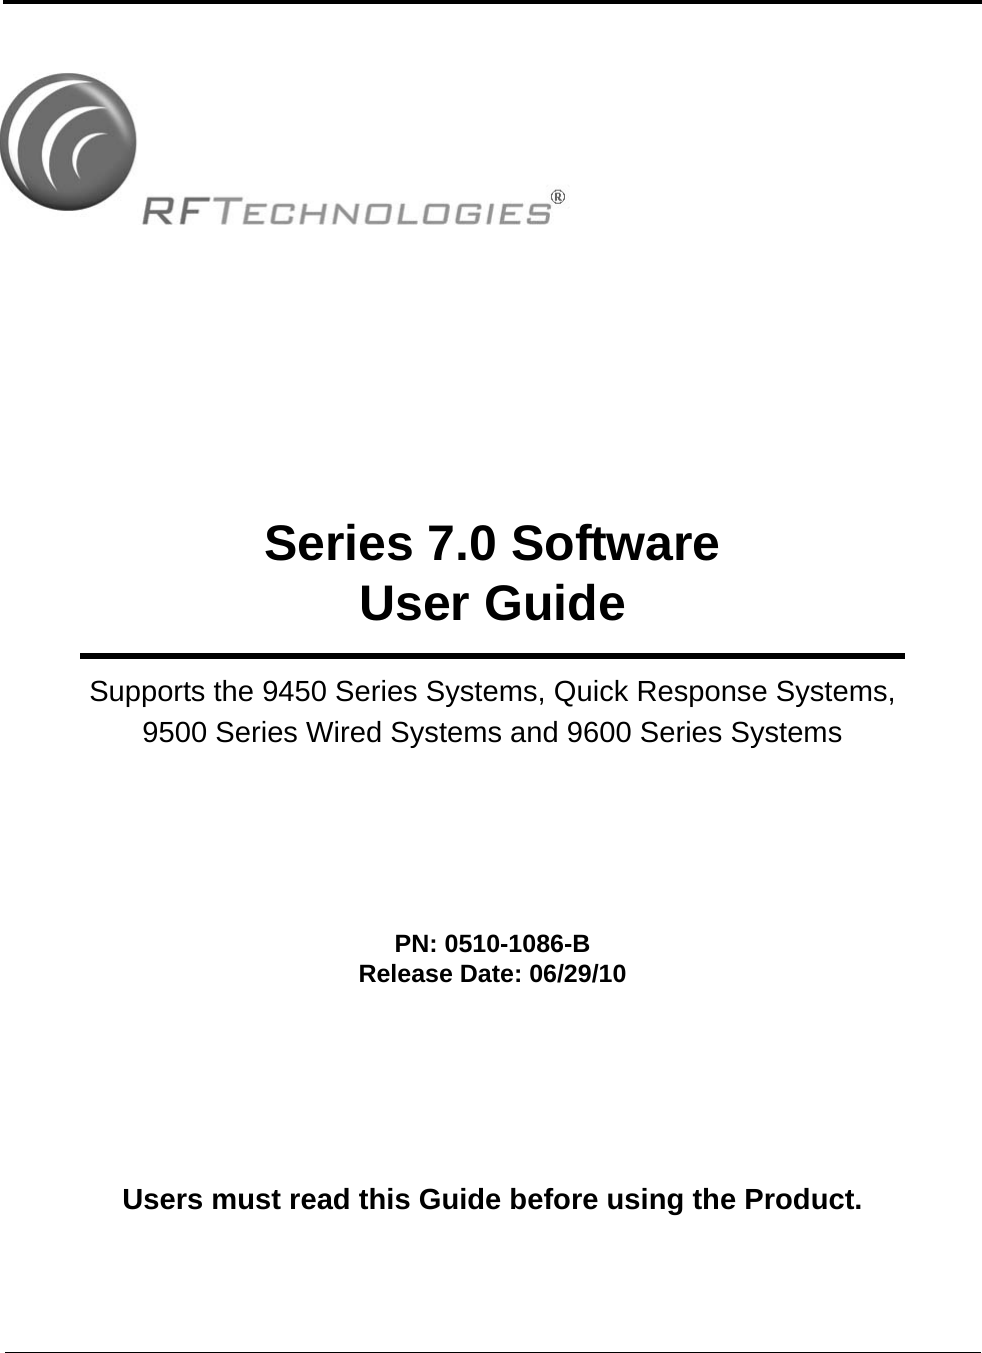 Series 7.0 SoftwareUser GuideSupports the 9450 Series Systems, Quick Response Systems,9500 Series Wired Systems and 9600 Series Systems PN: 0510-1086-B Release Date: 06/29/10Users must read this Guide before using the Product.